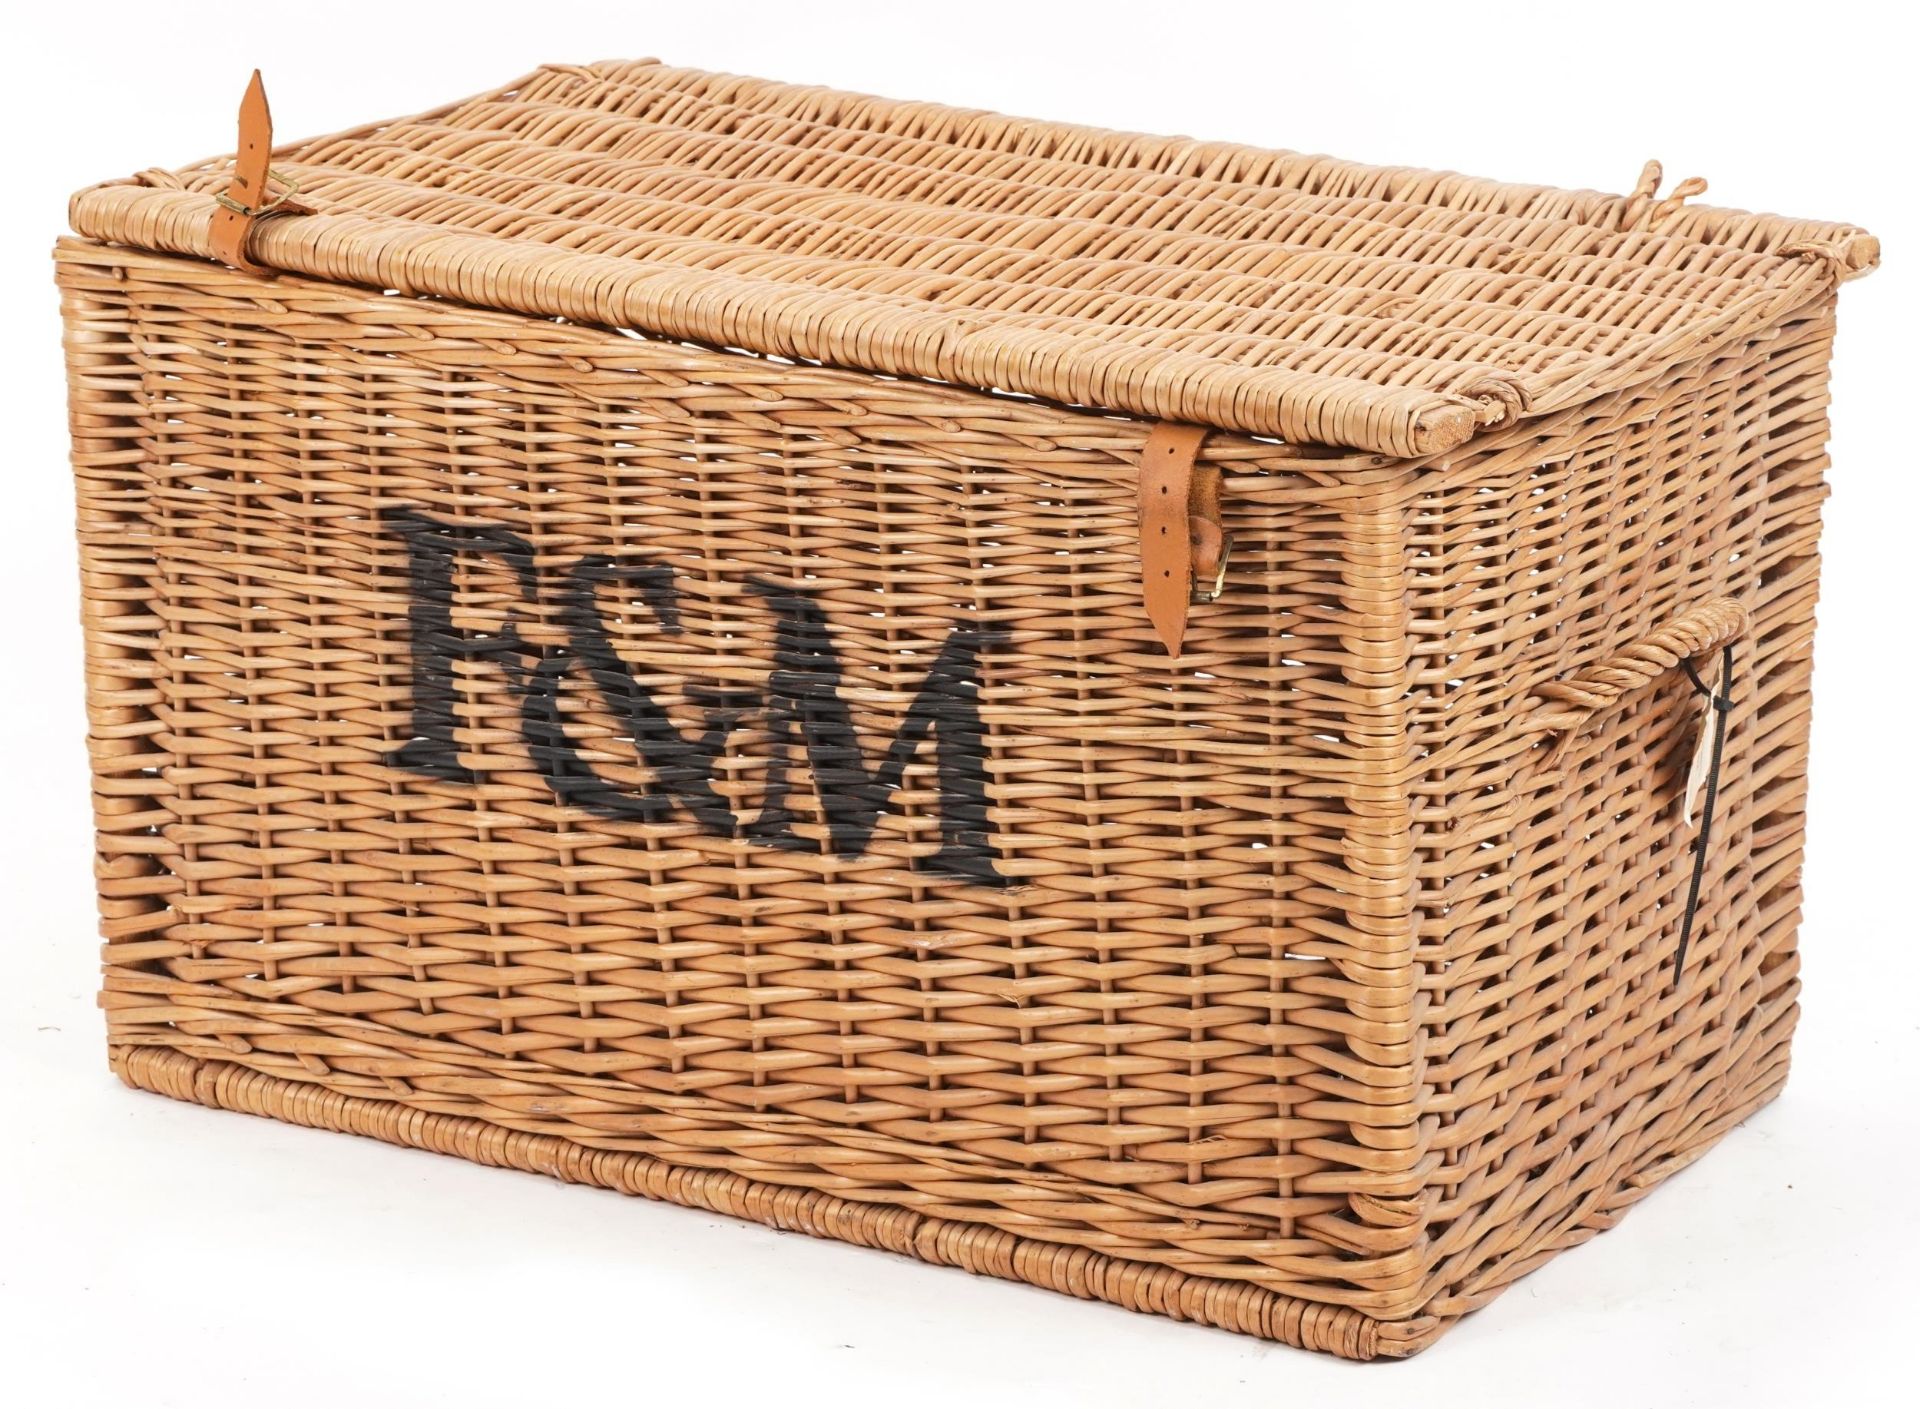 Large Fortnum & Mason wicker hamper, 49cm H x 80cm W x 48cm D : For further information on this